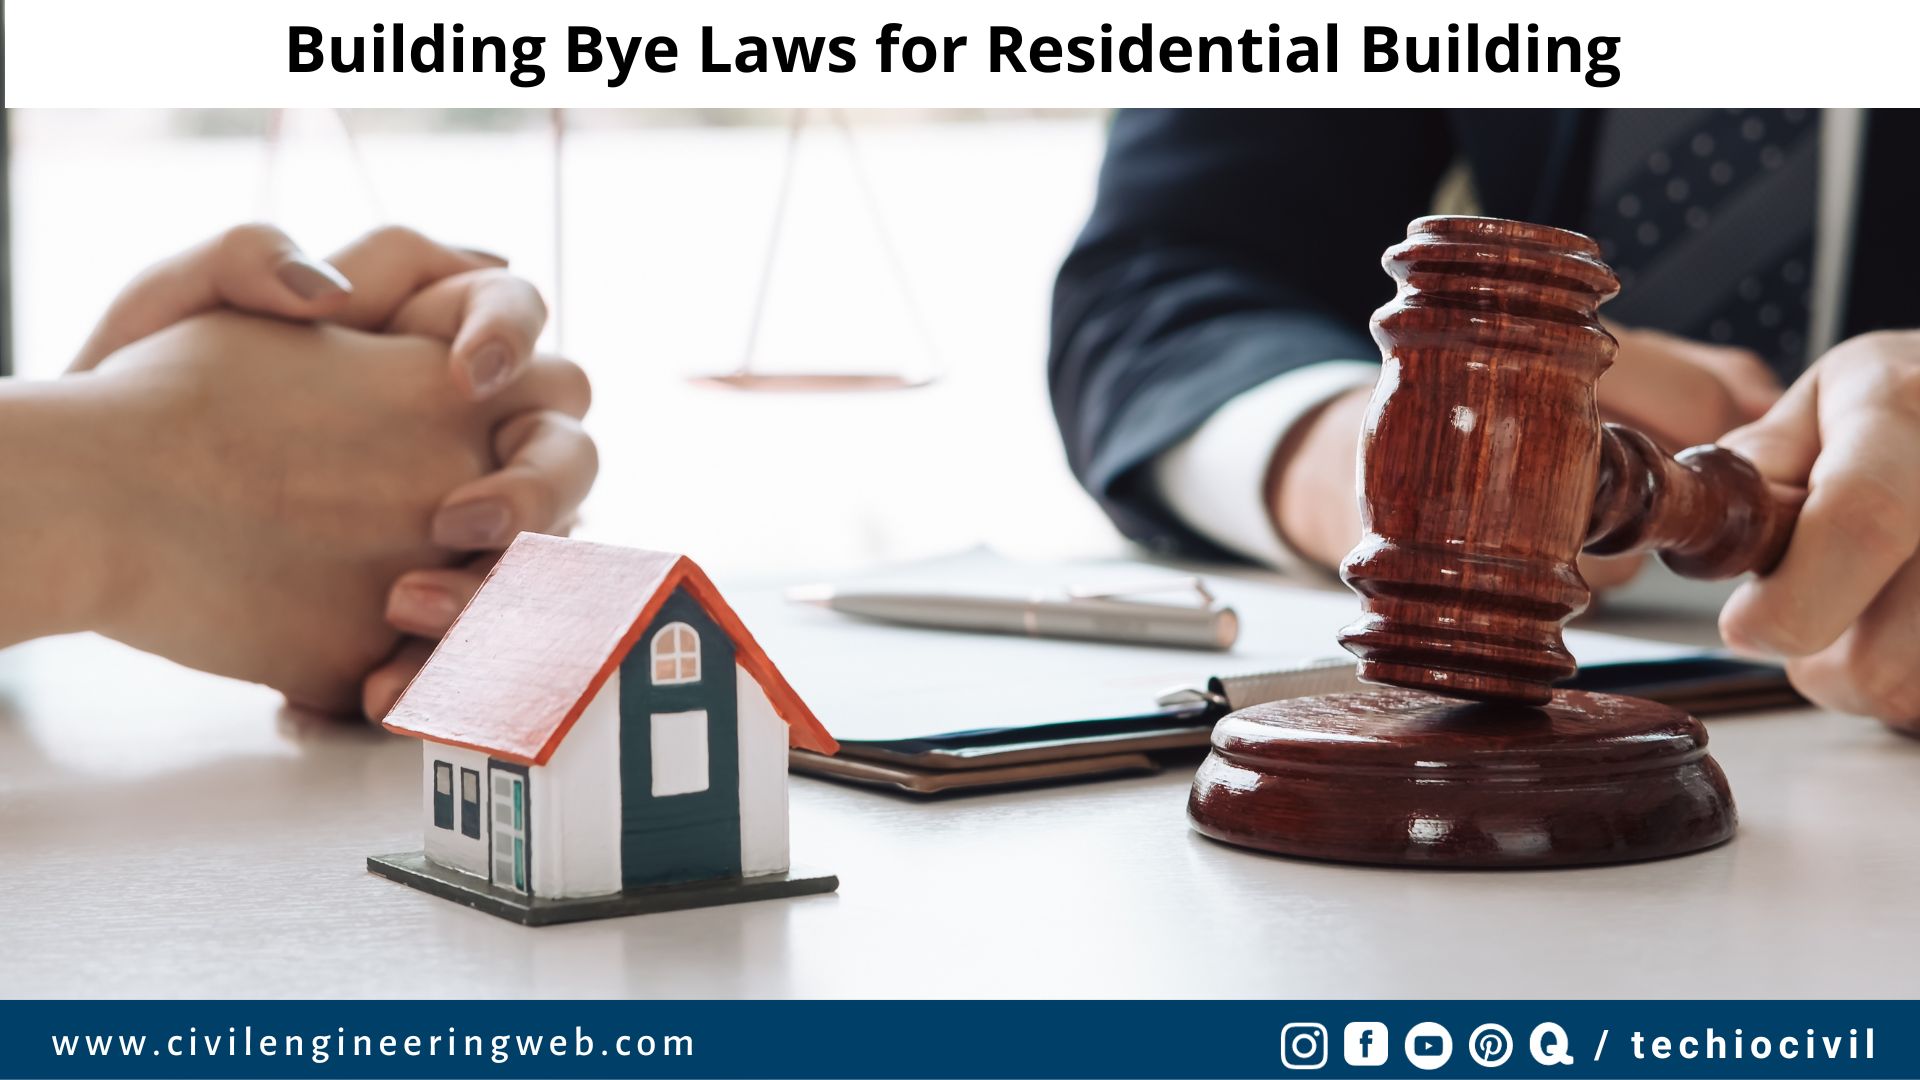 Building Bye Laws for Residential Building